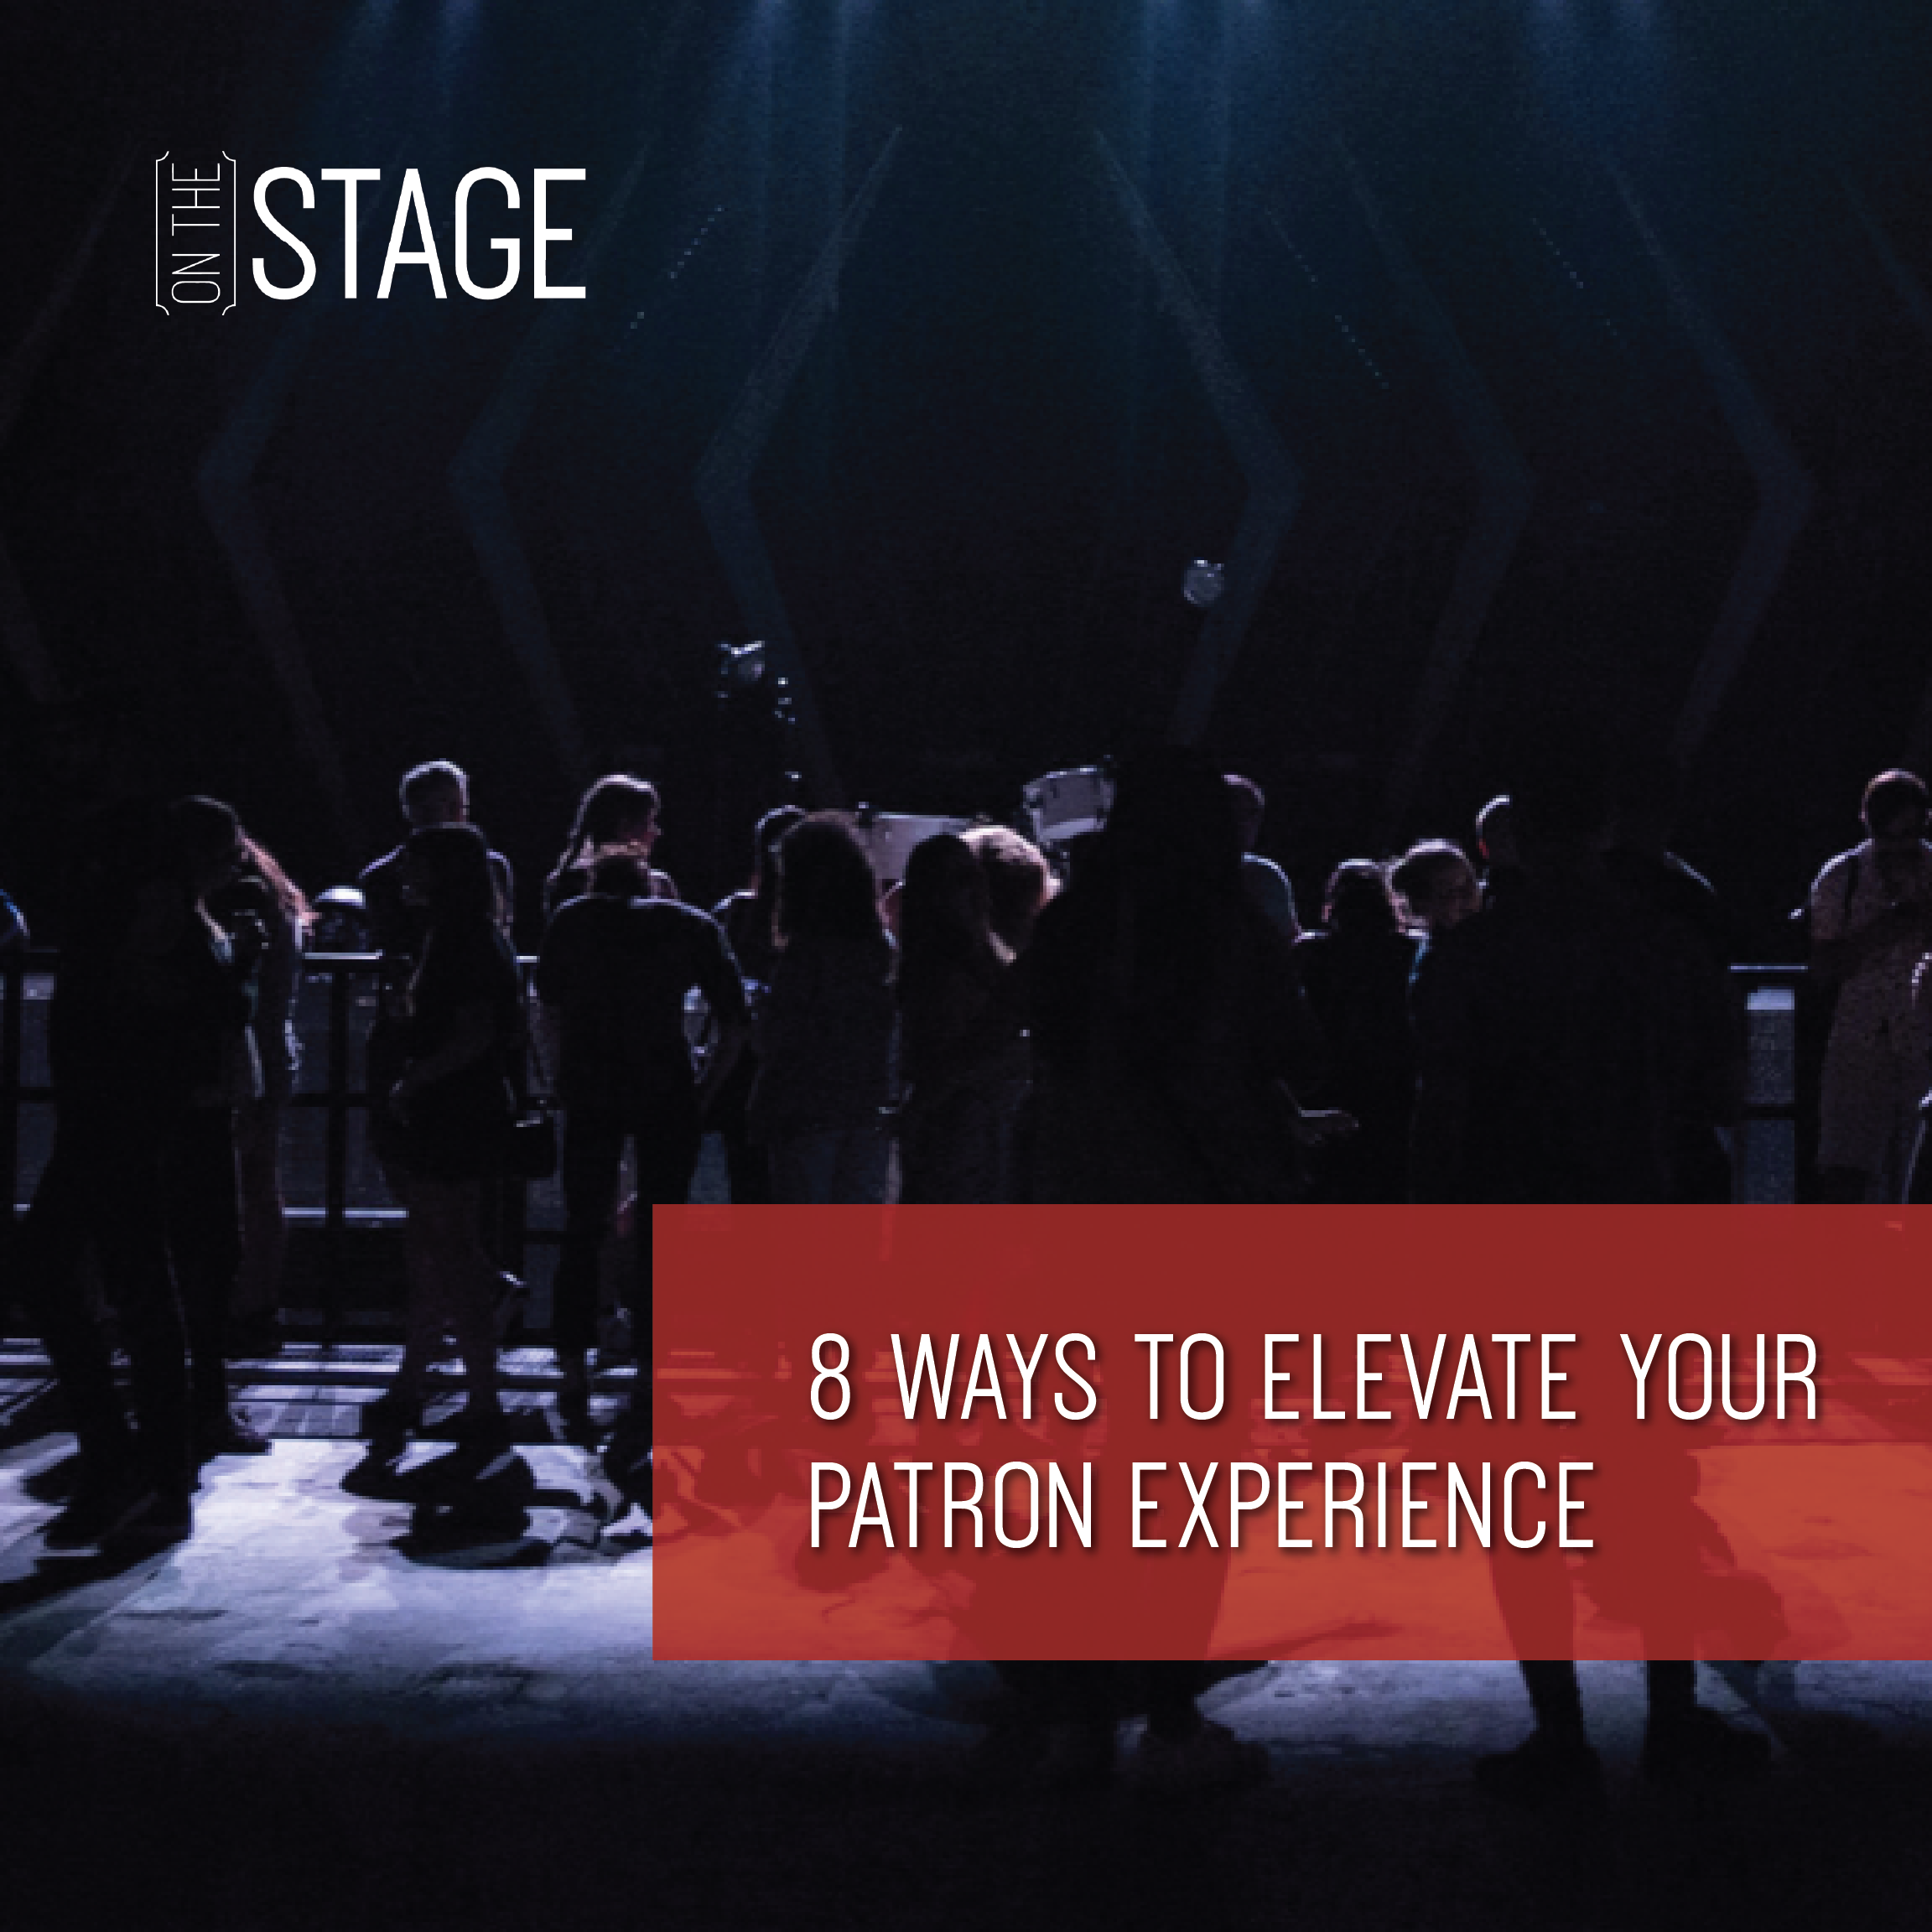 8 Ways to Elevate your Patron Experience